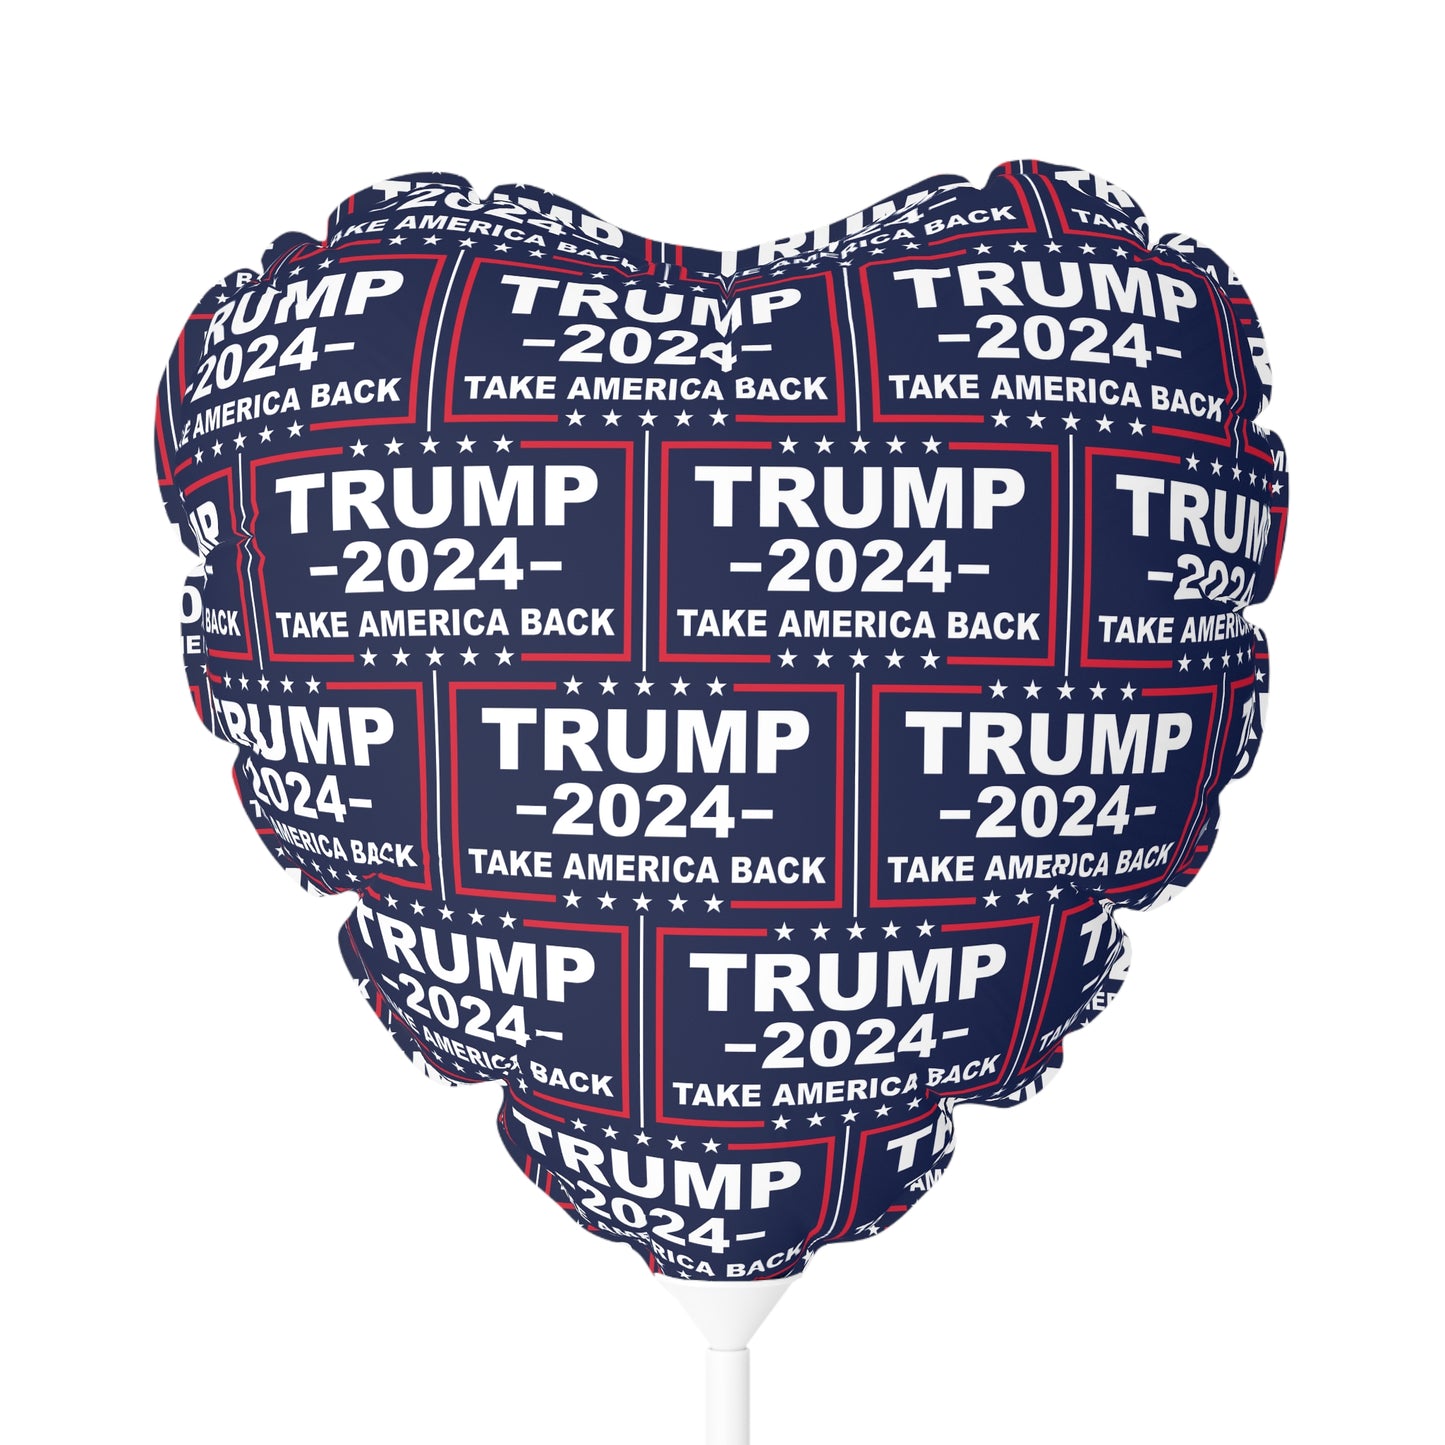 You Stole my Heart like a 2020 Election Trump Balloon Round and Heart shaped 11 inch